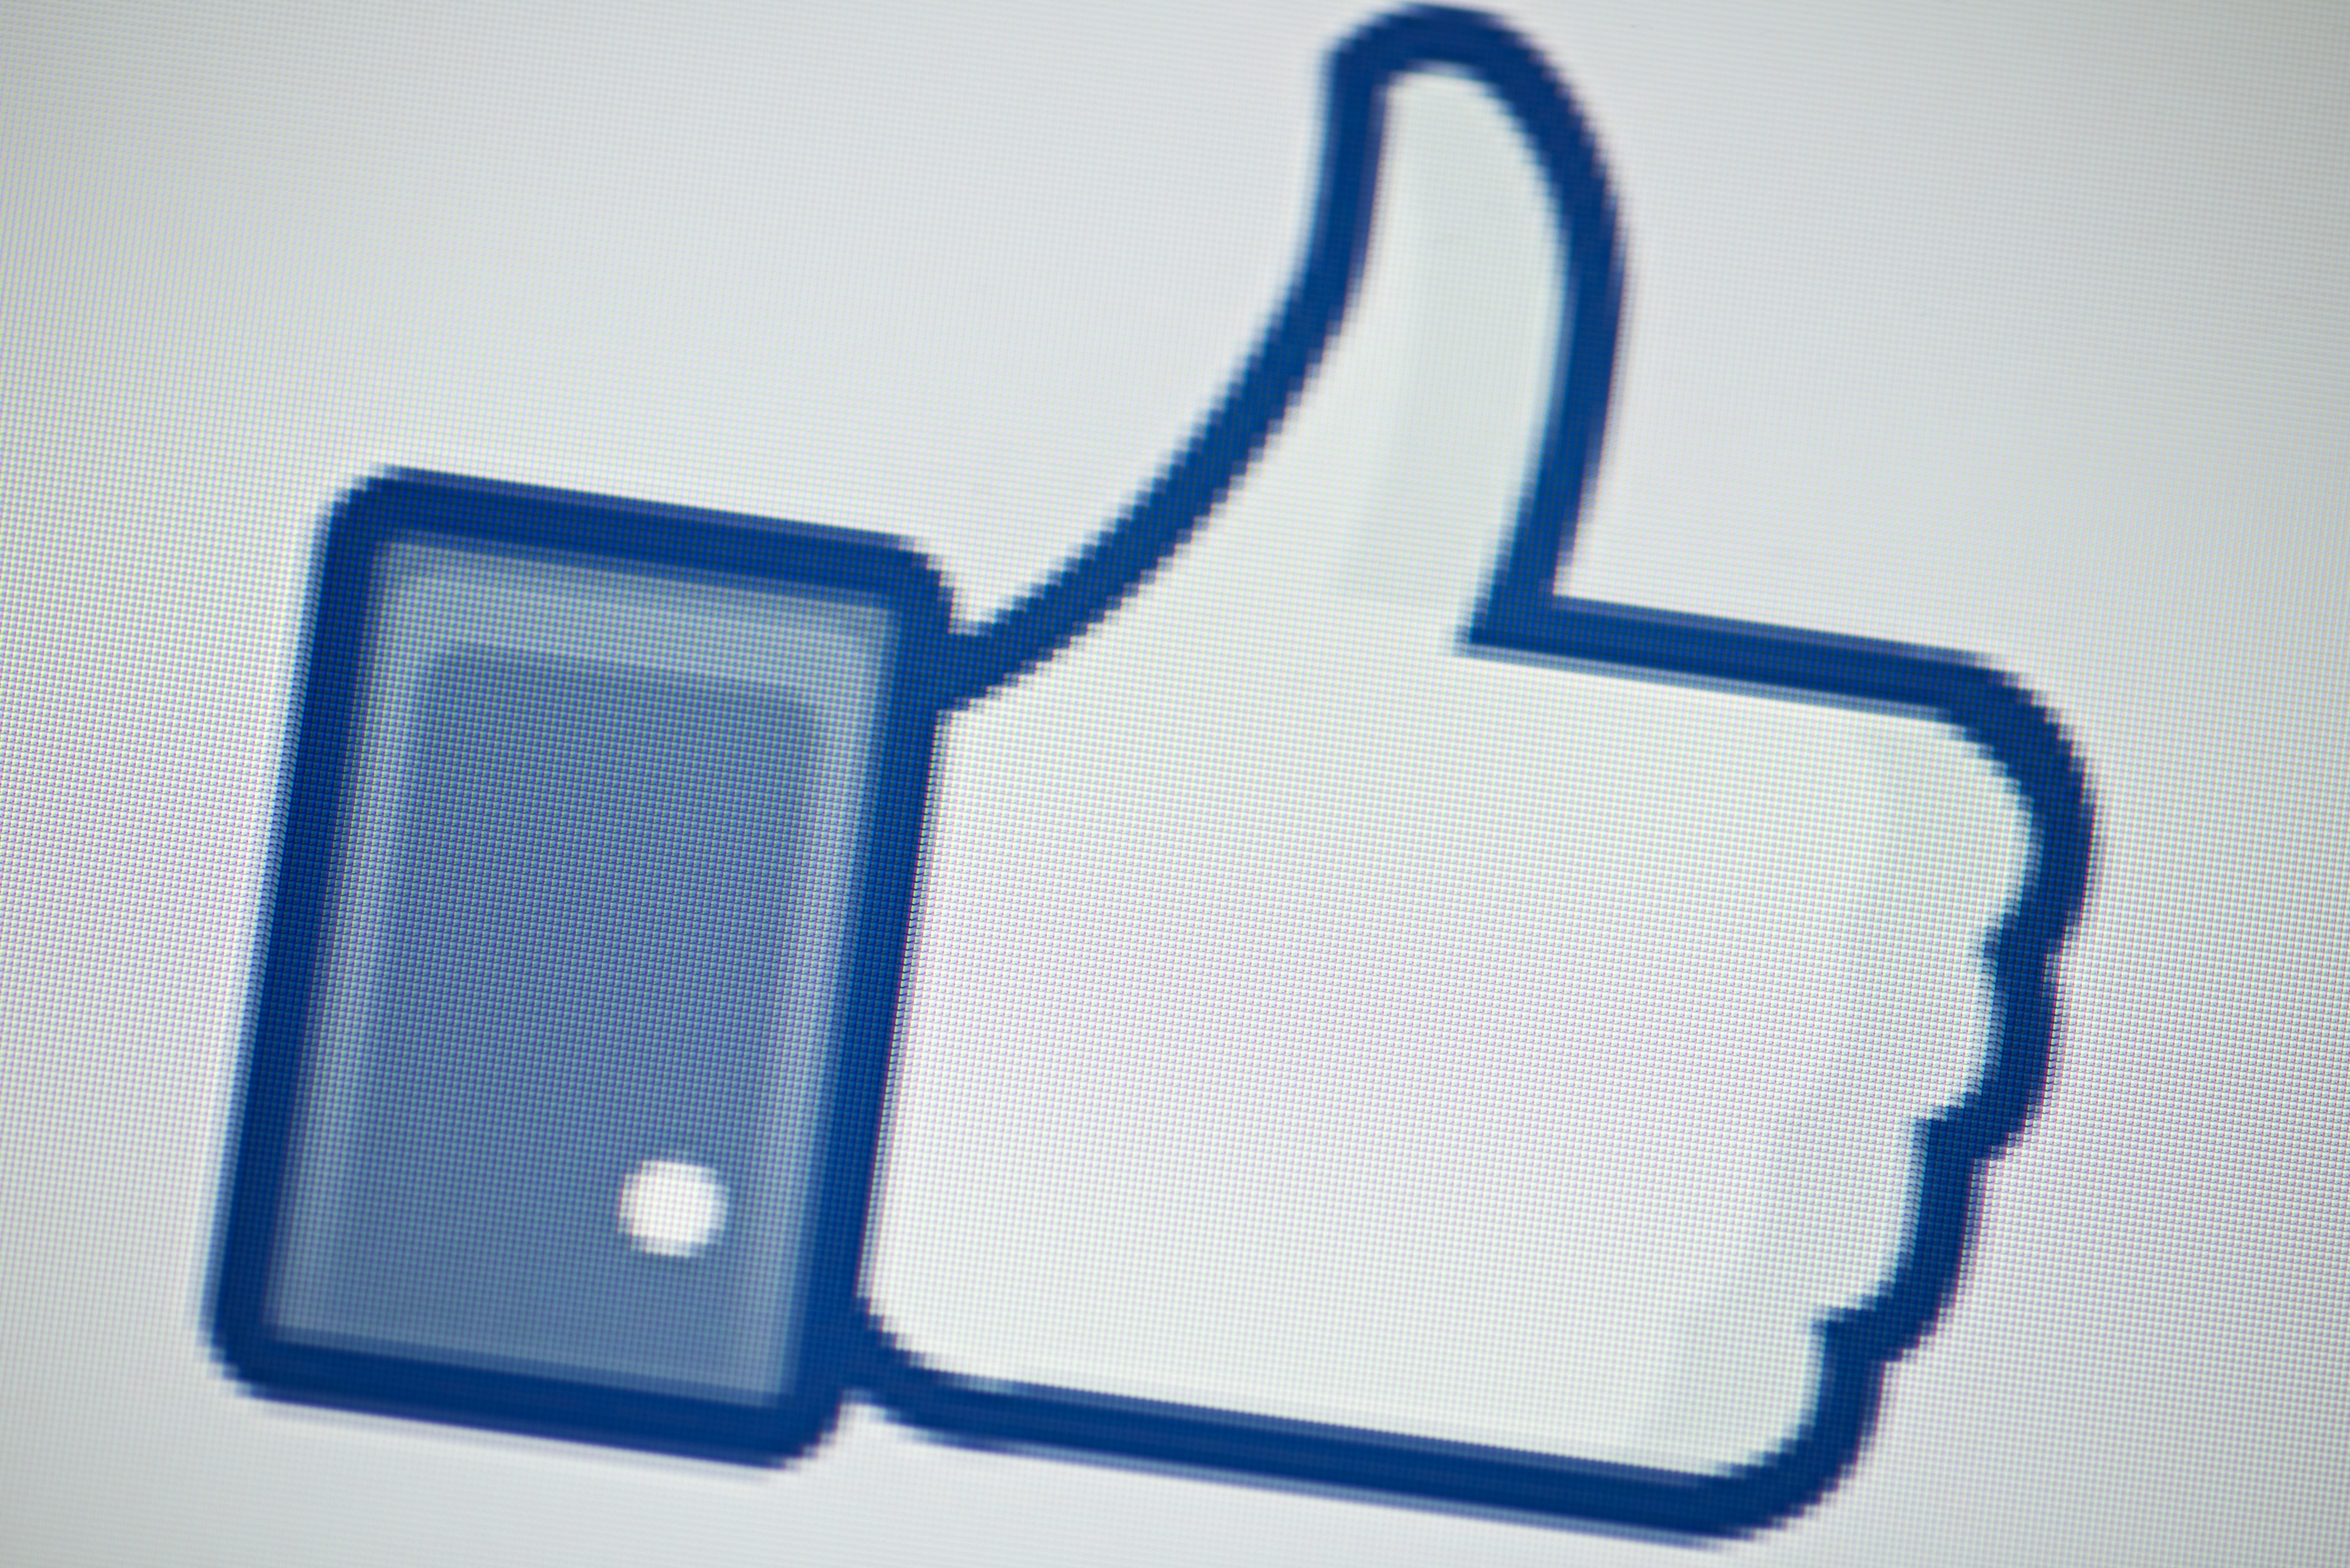 A view of Facebook's "Like" button May 10, 2012 in Washington, DC. (Brendan Smialowski&mdash;AFP/Getty Images)